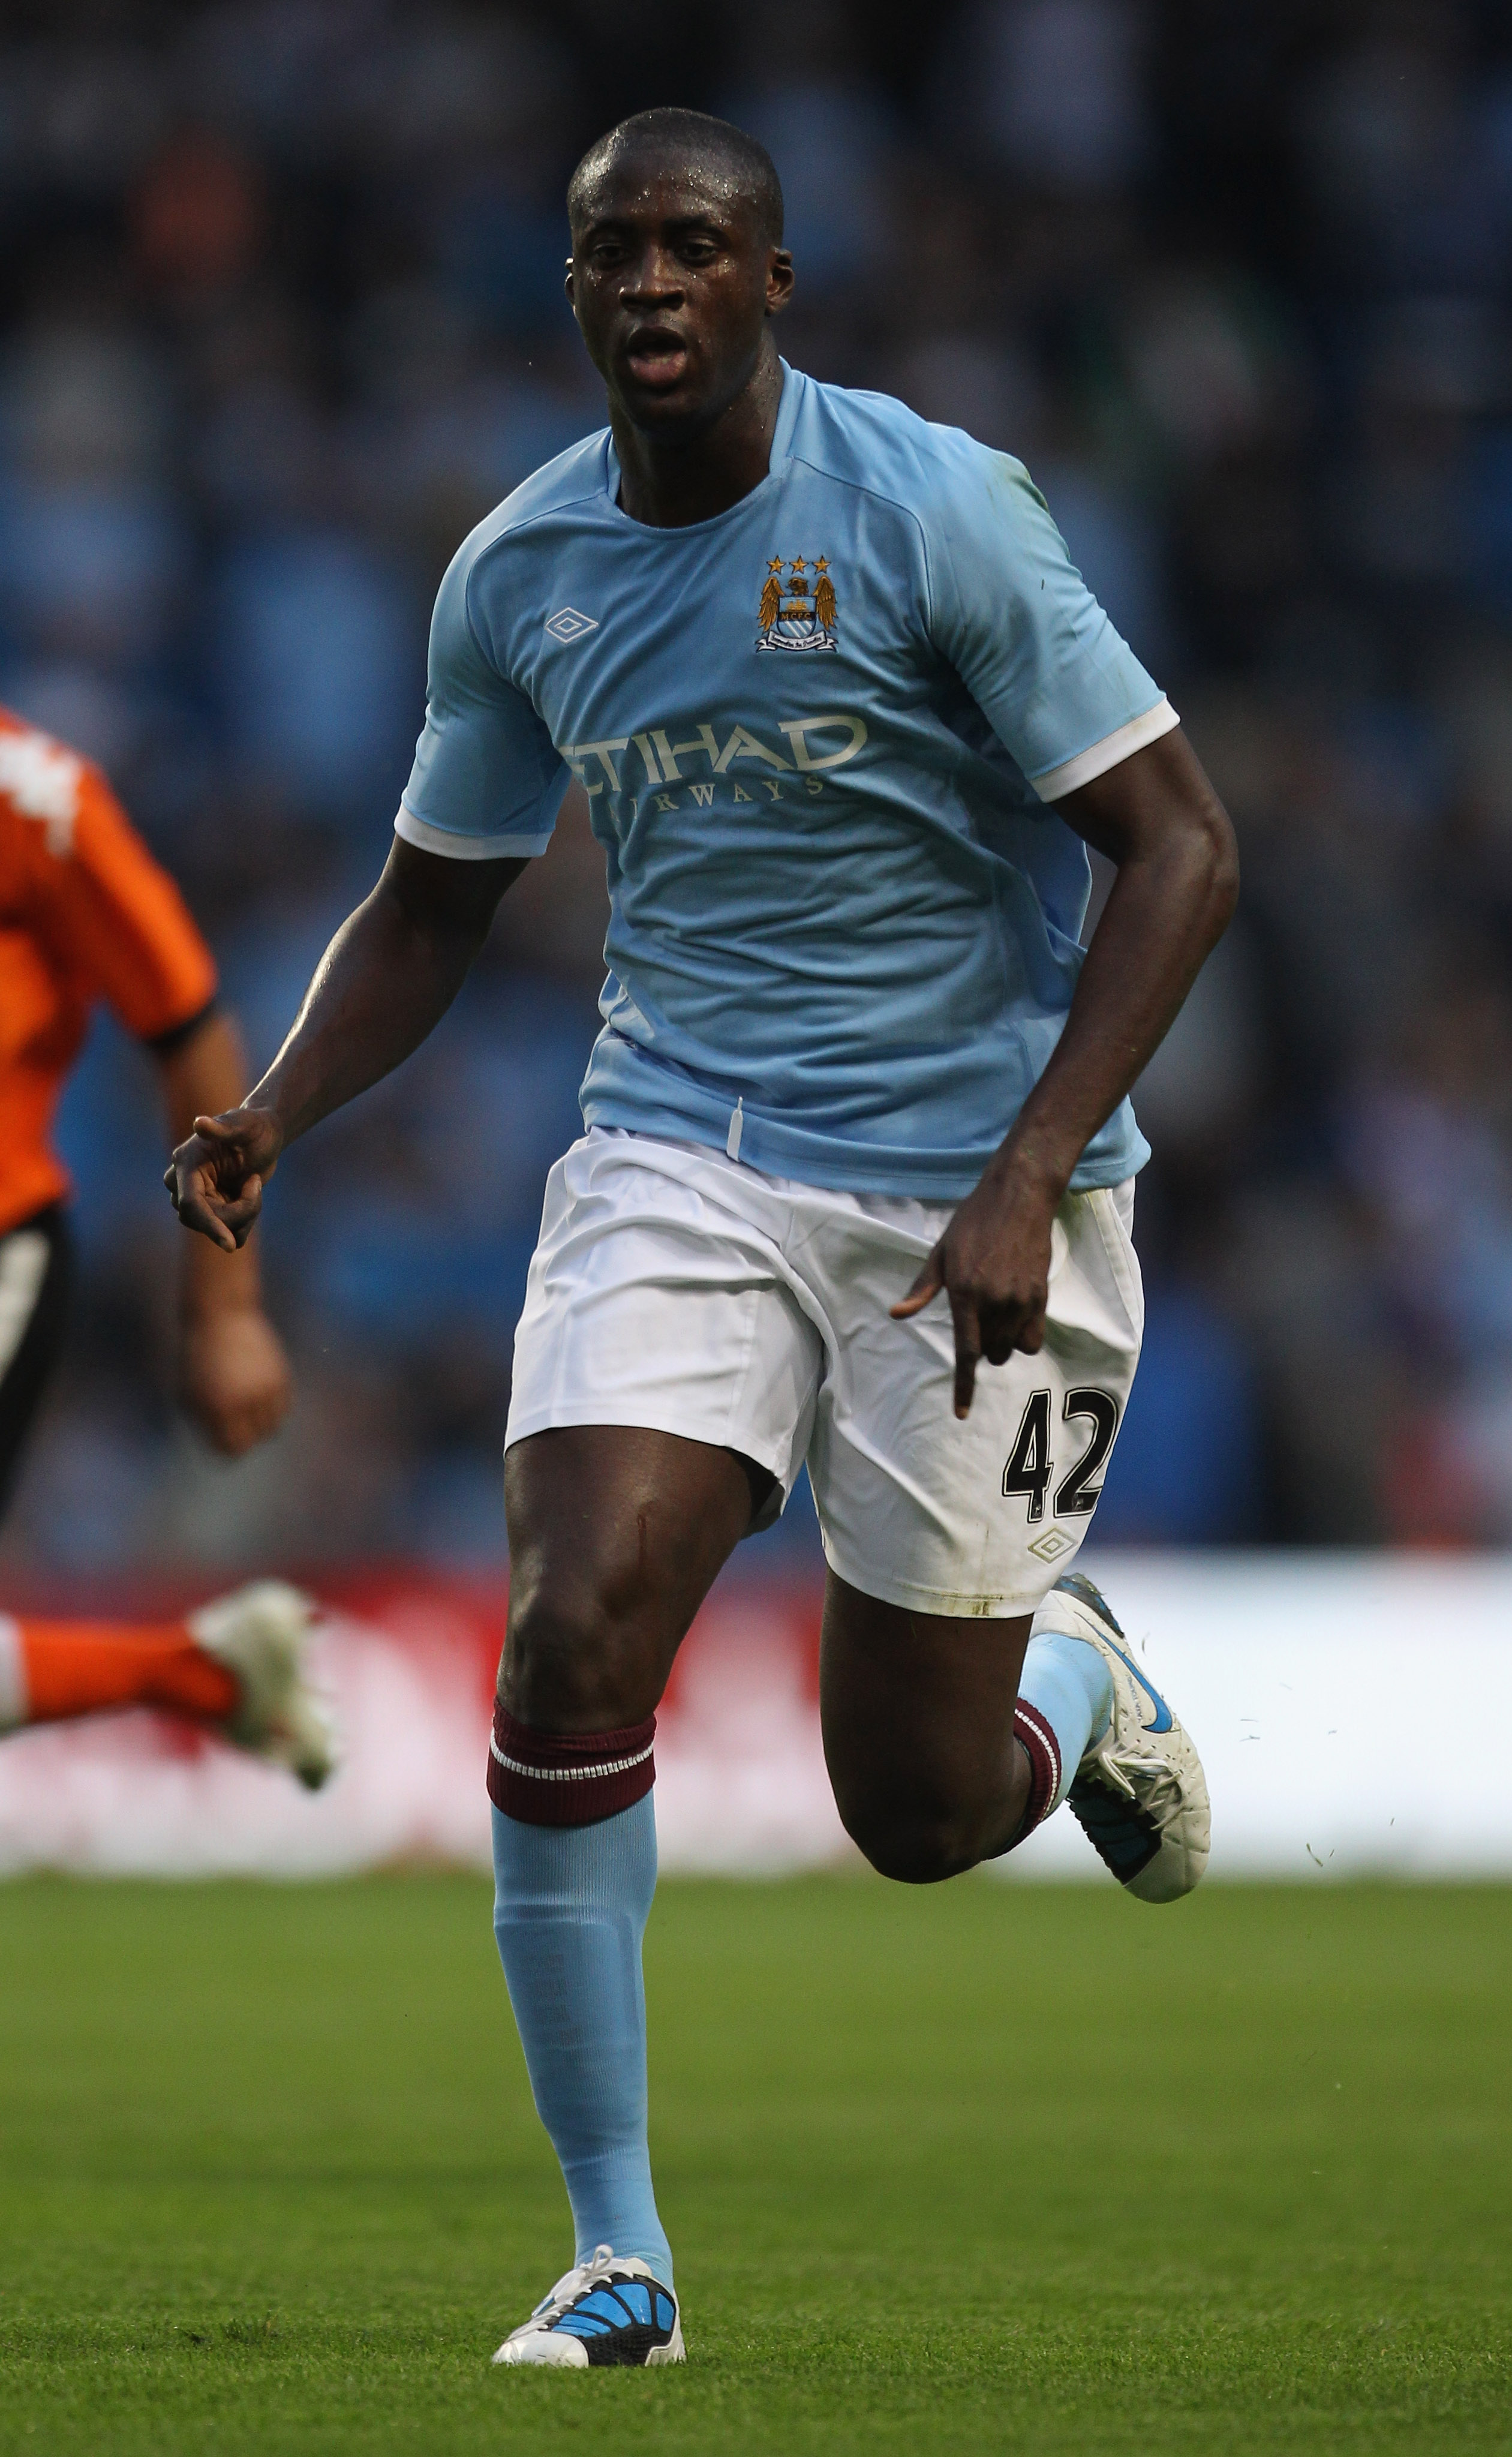 MANCHESTER, ENGLAND - AUGUST 07:  Yaya Toure of Manchester City during the pre-season friendly match between Manchester City and Valencia at the City of Manchester Stadium on August 7, 2010 in Manchester, England.  (Photo by Alex Livesey/Getty Images)